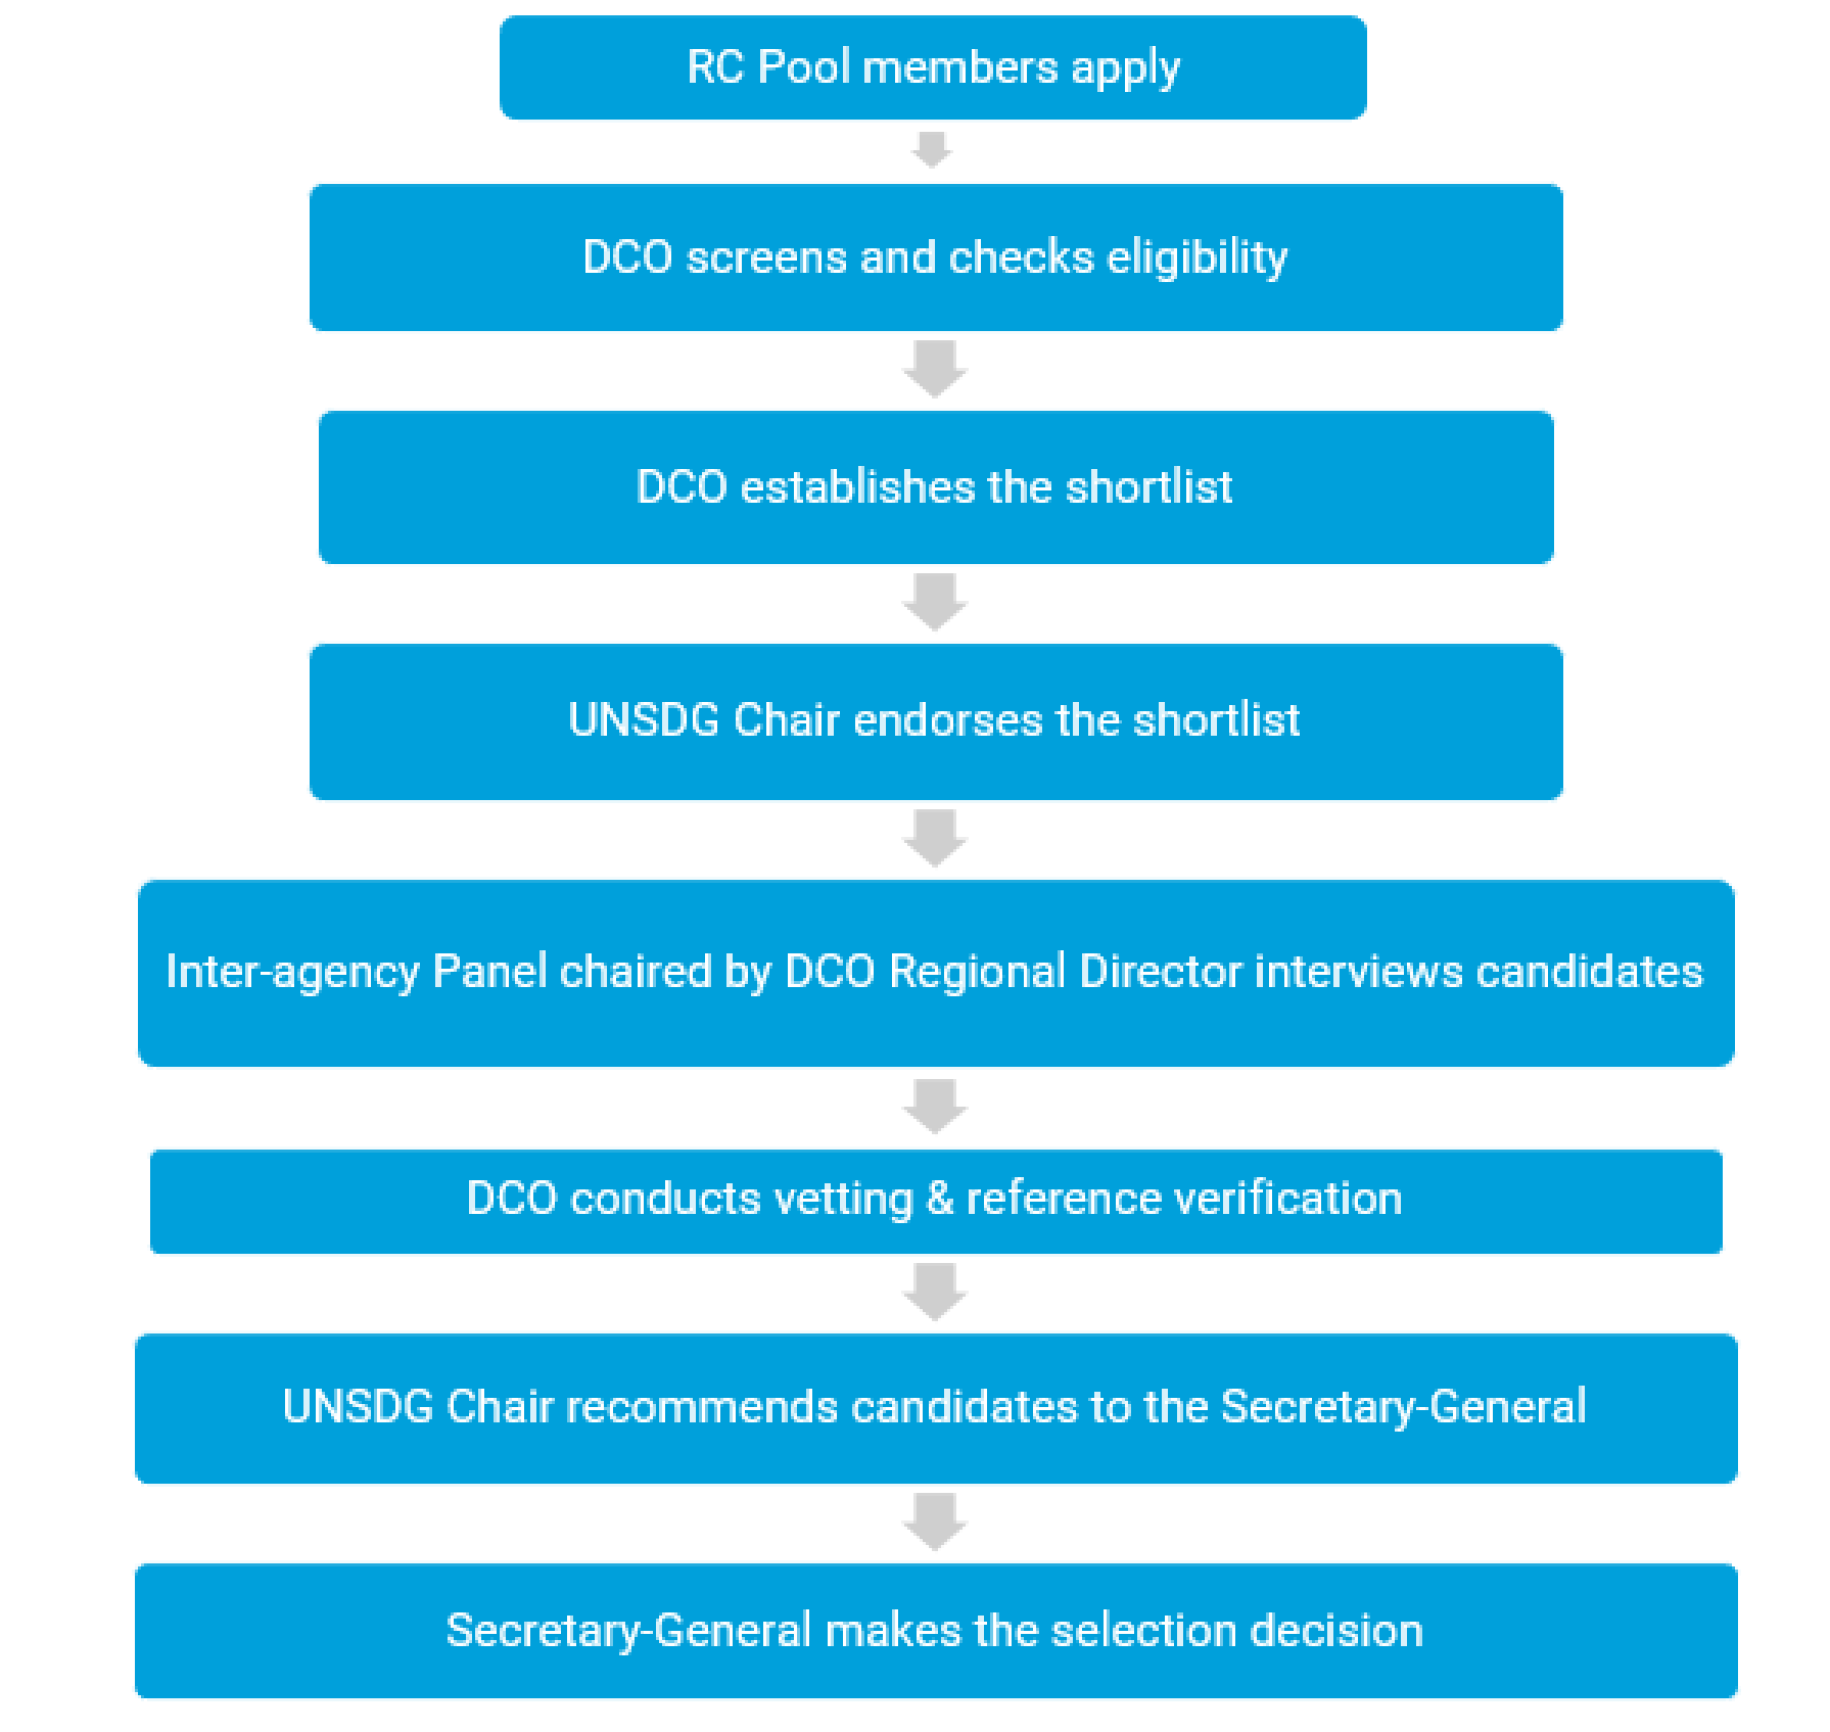 Flowchart related to the RC selection process